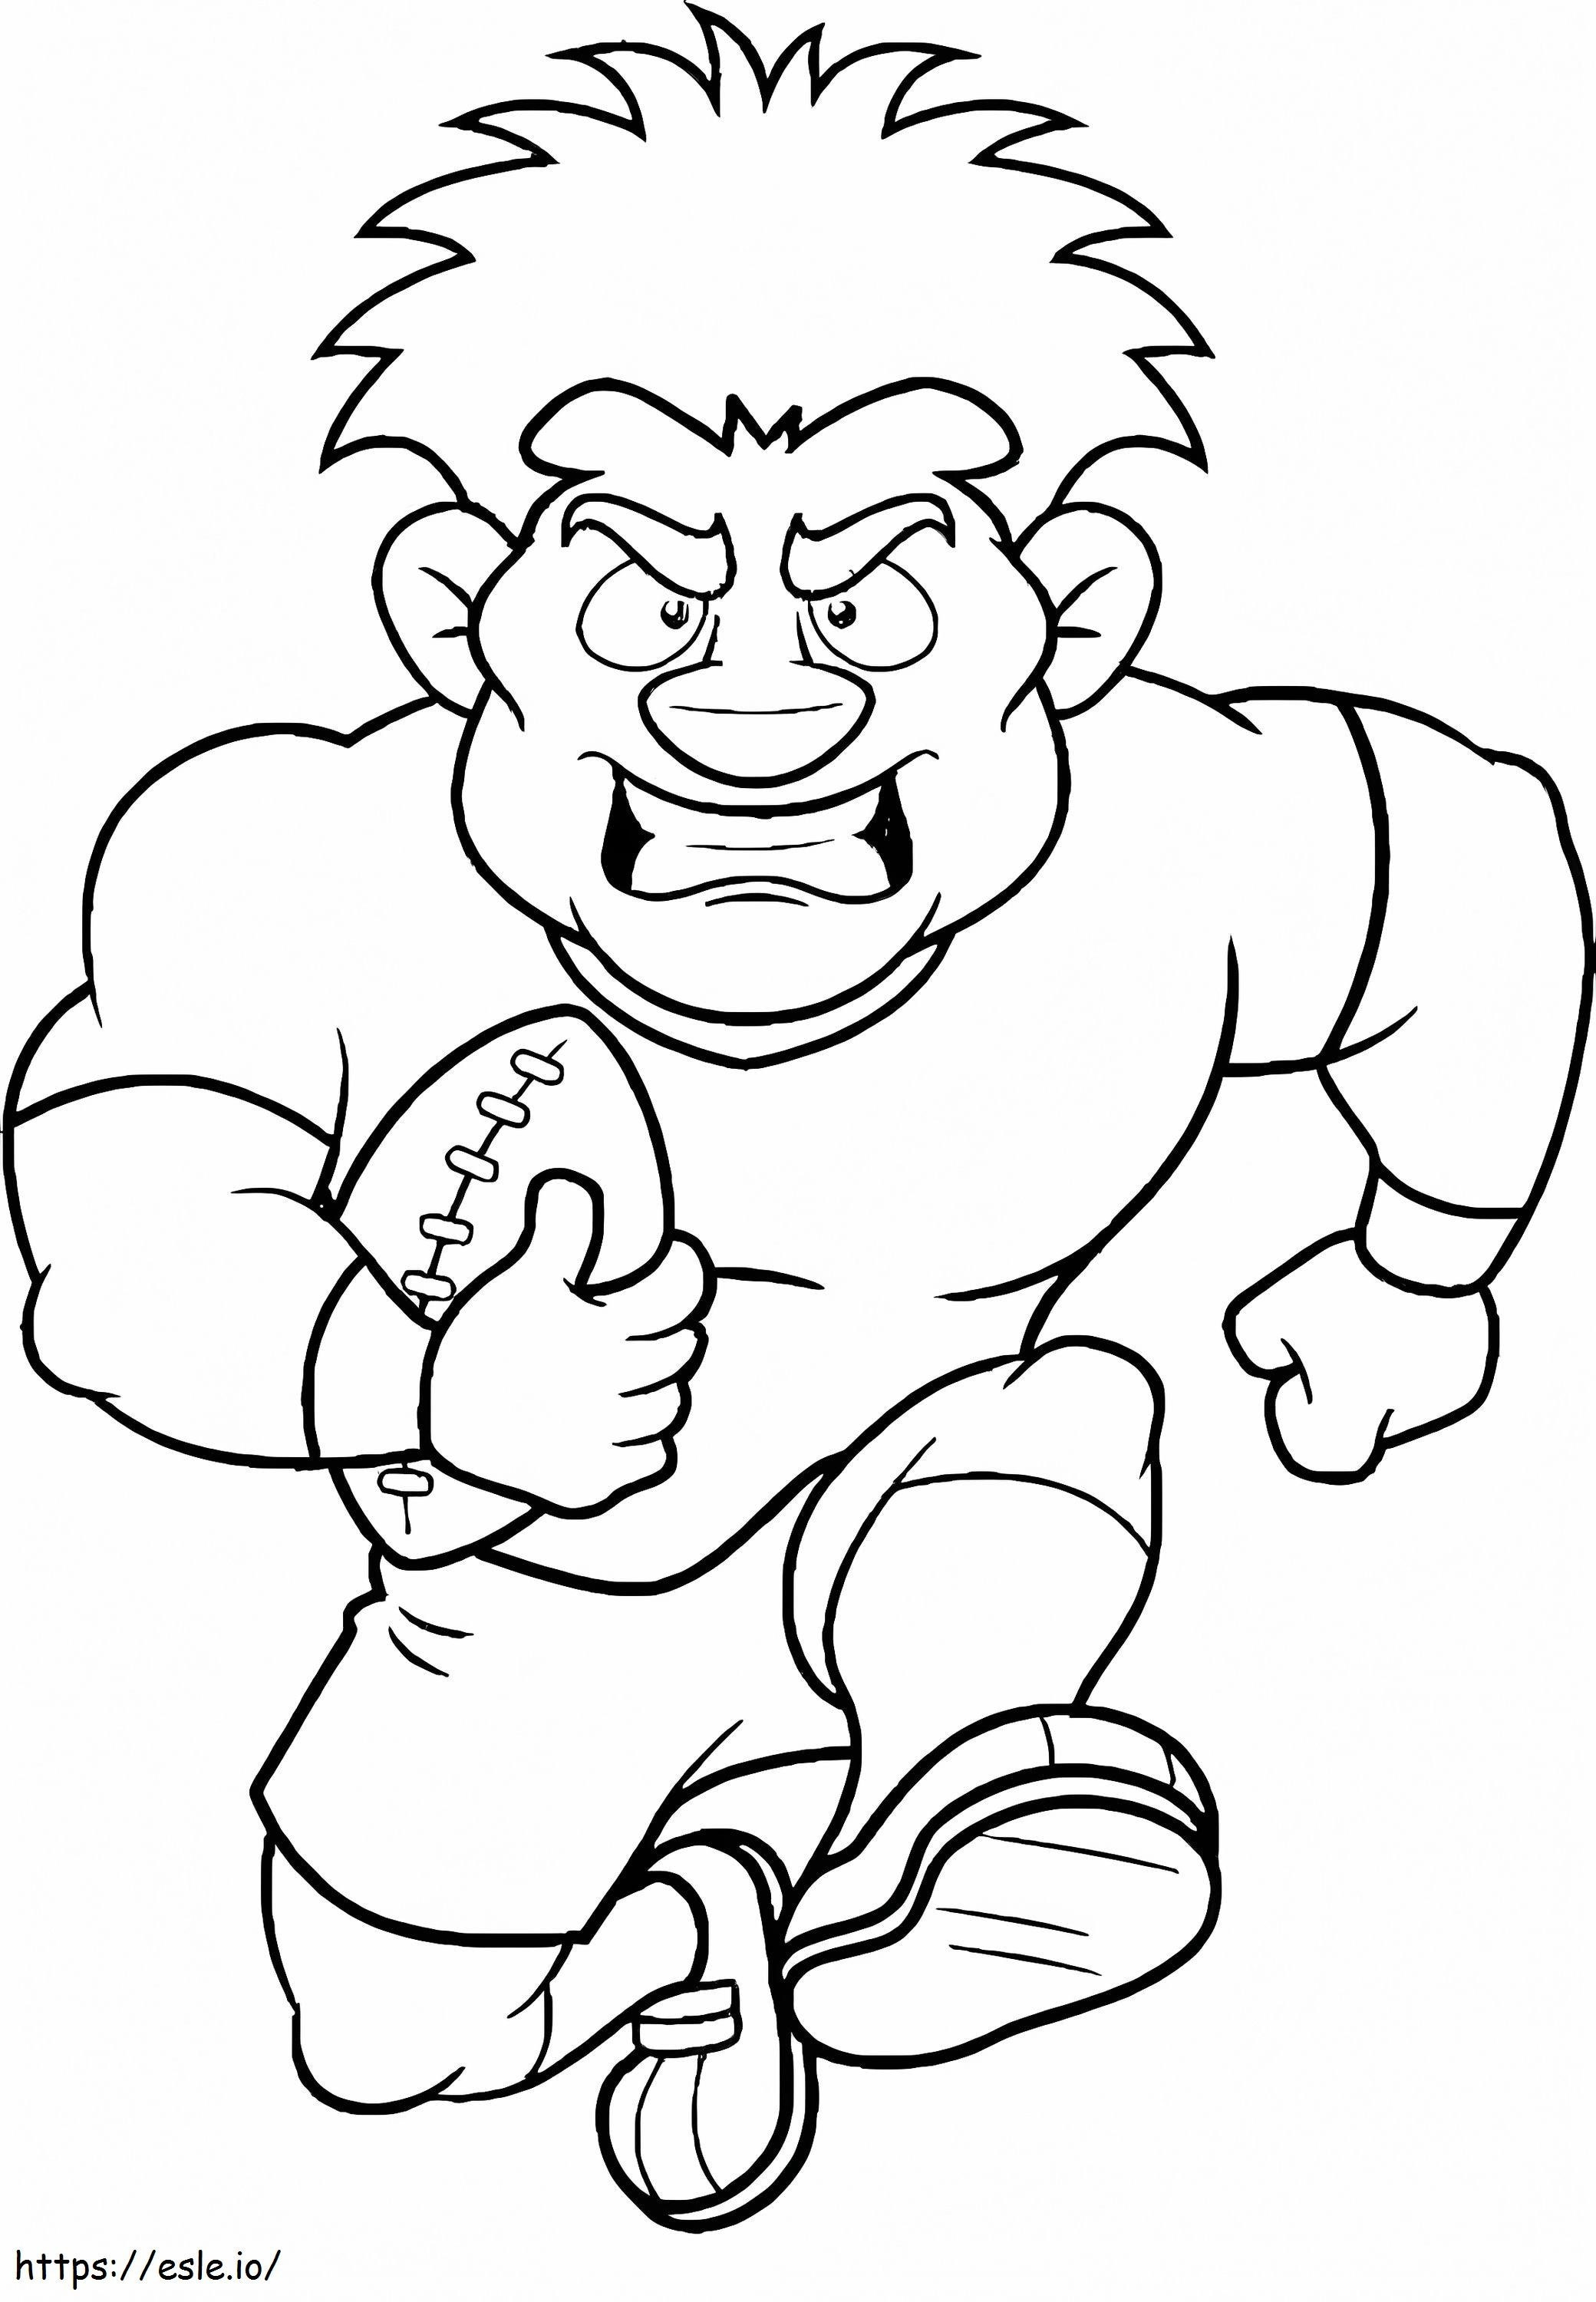 Angry Rugby Player coloring page